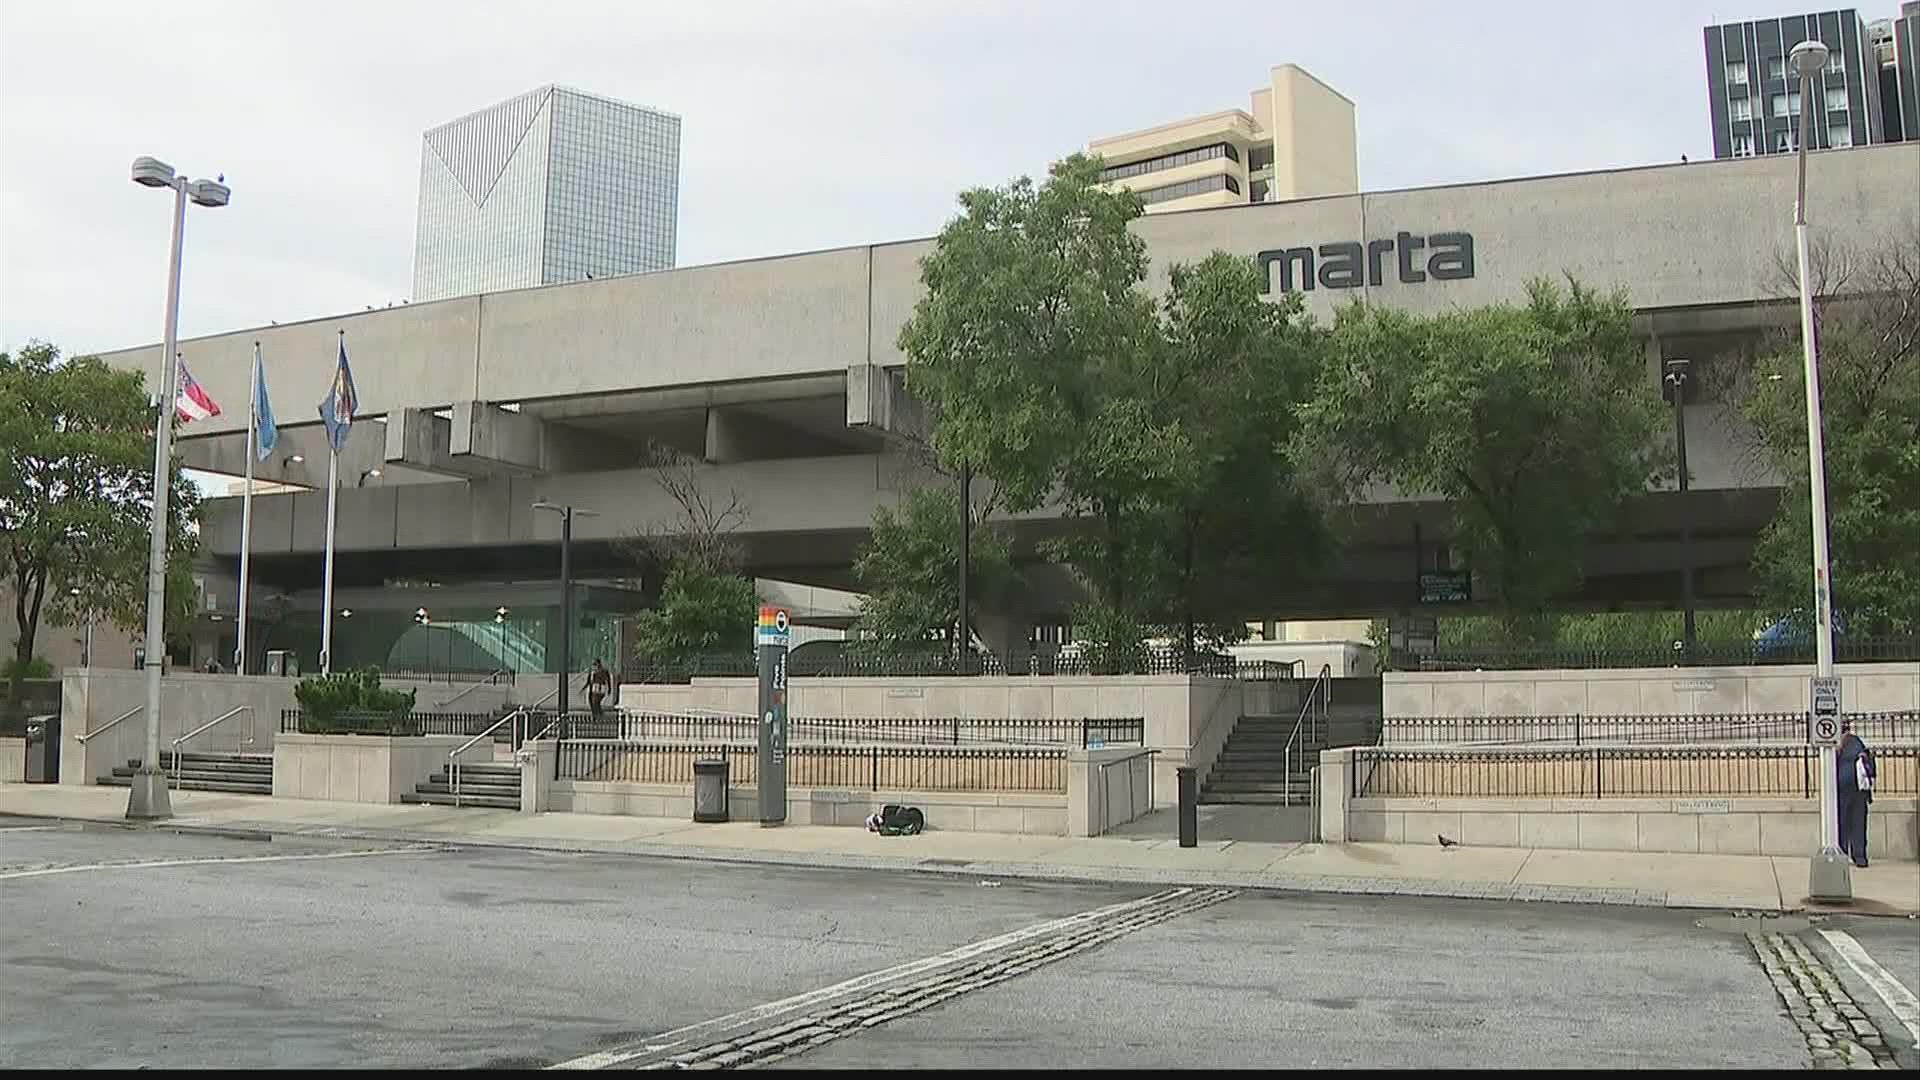 While there are no credible threats, MARTA said it has placed additional officers, K-9 units, and special operations teams on trains and in train stations.